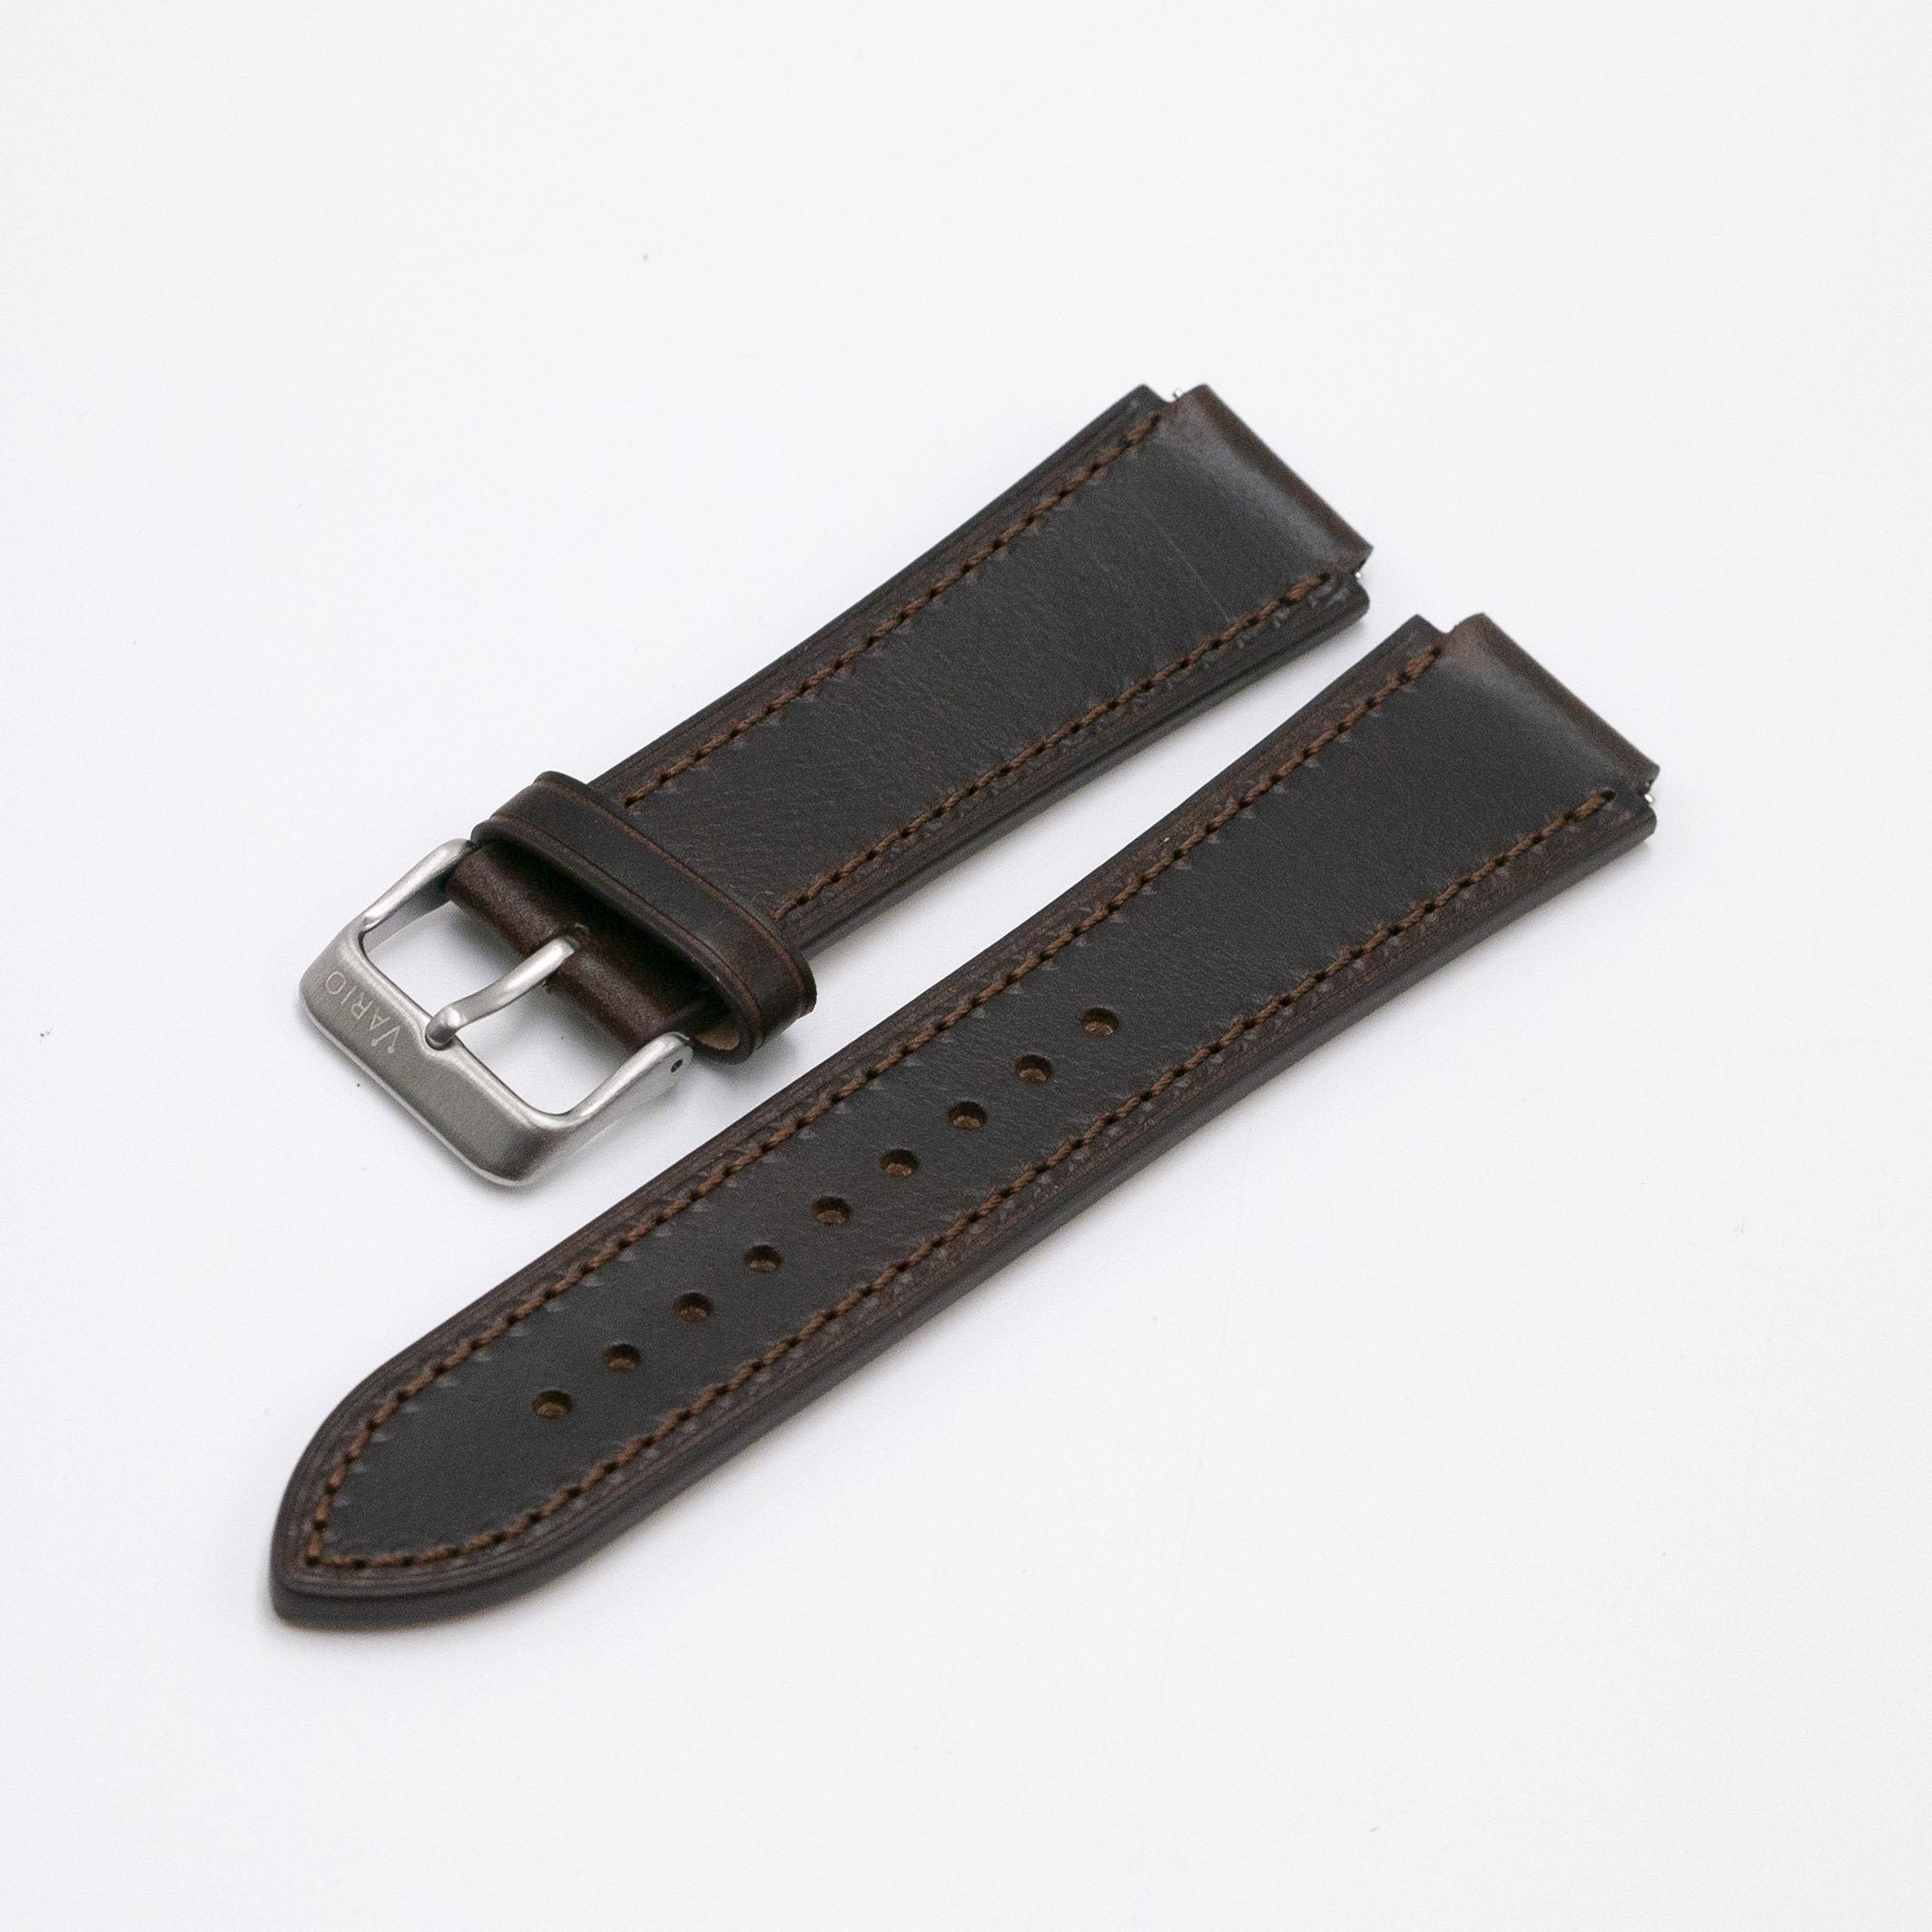 Oiled Leather Pecan Watch Strap for Casio AE1200WH World Time Watch